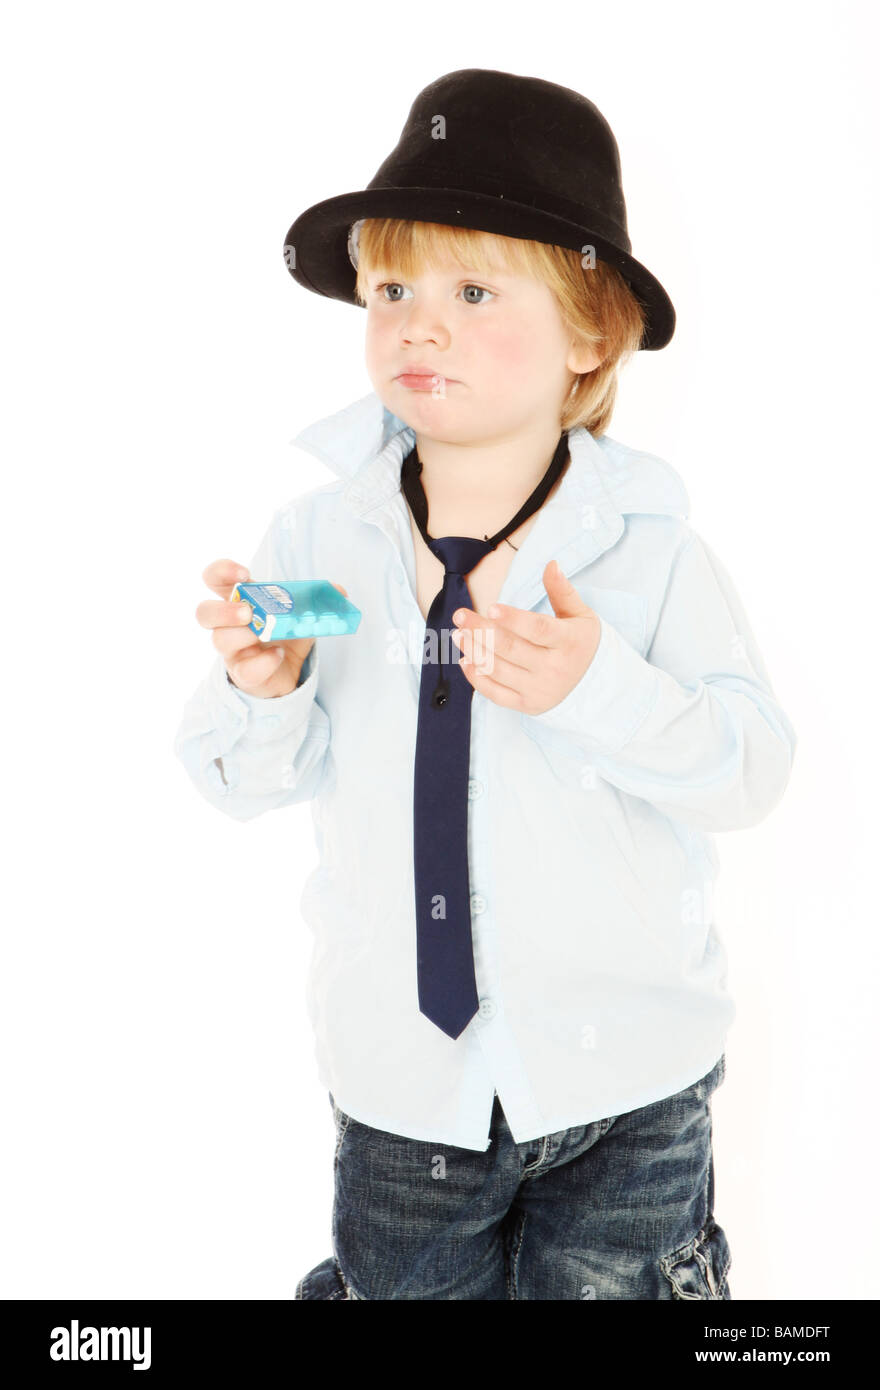 young boy with tie and hat isolated on white Stock Photo